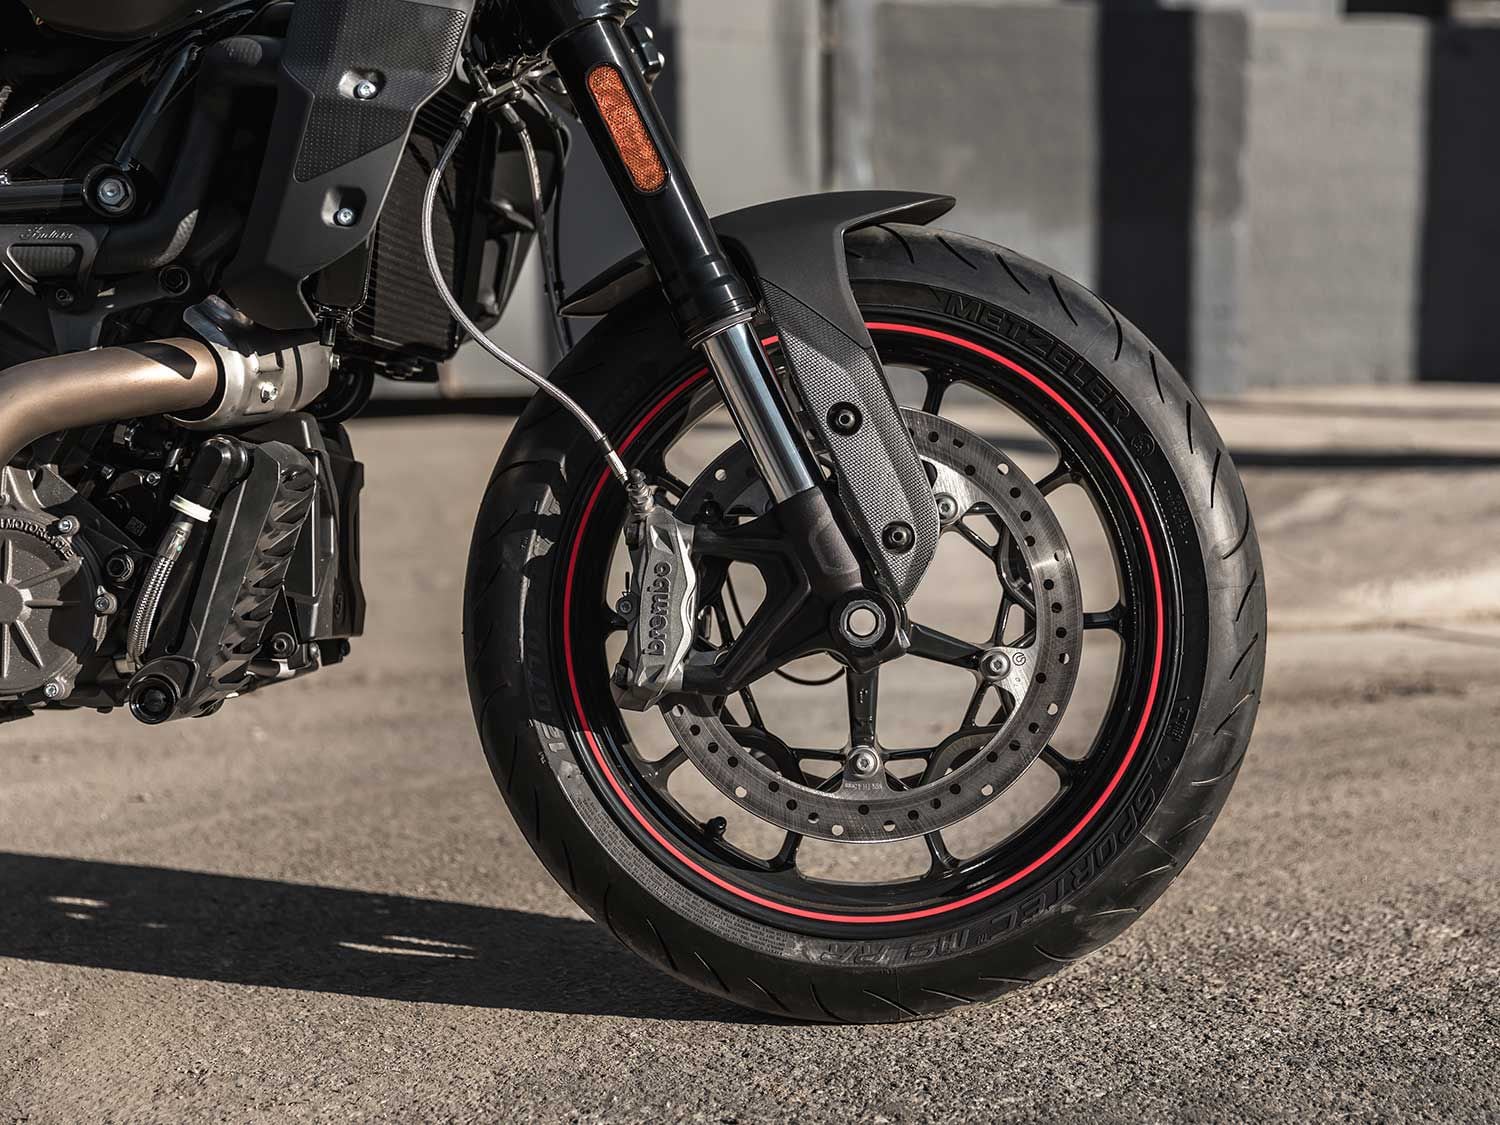 The Indian Motorcycle FTR ditches its 1200 nomenclature and its 19/18-inch wheel combo for a pair of road conventional 17-inch hoops.